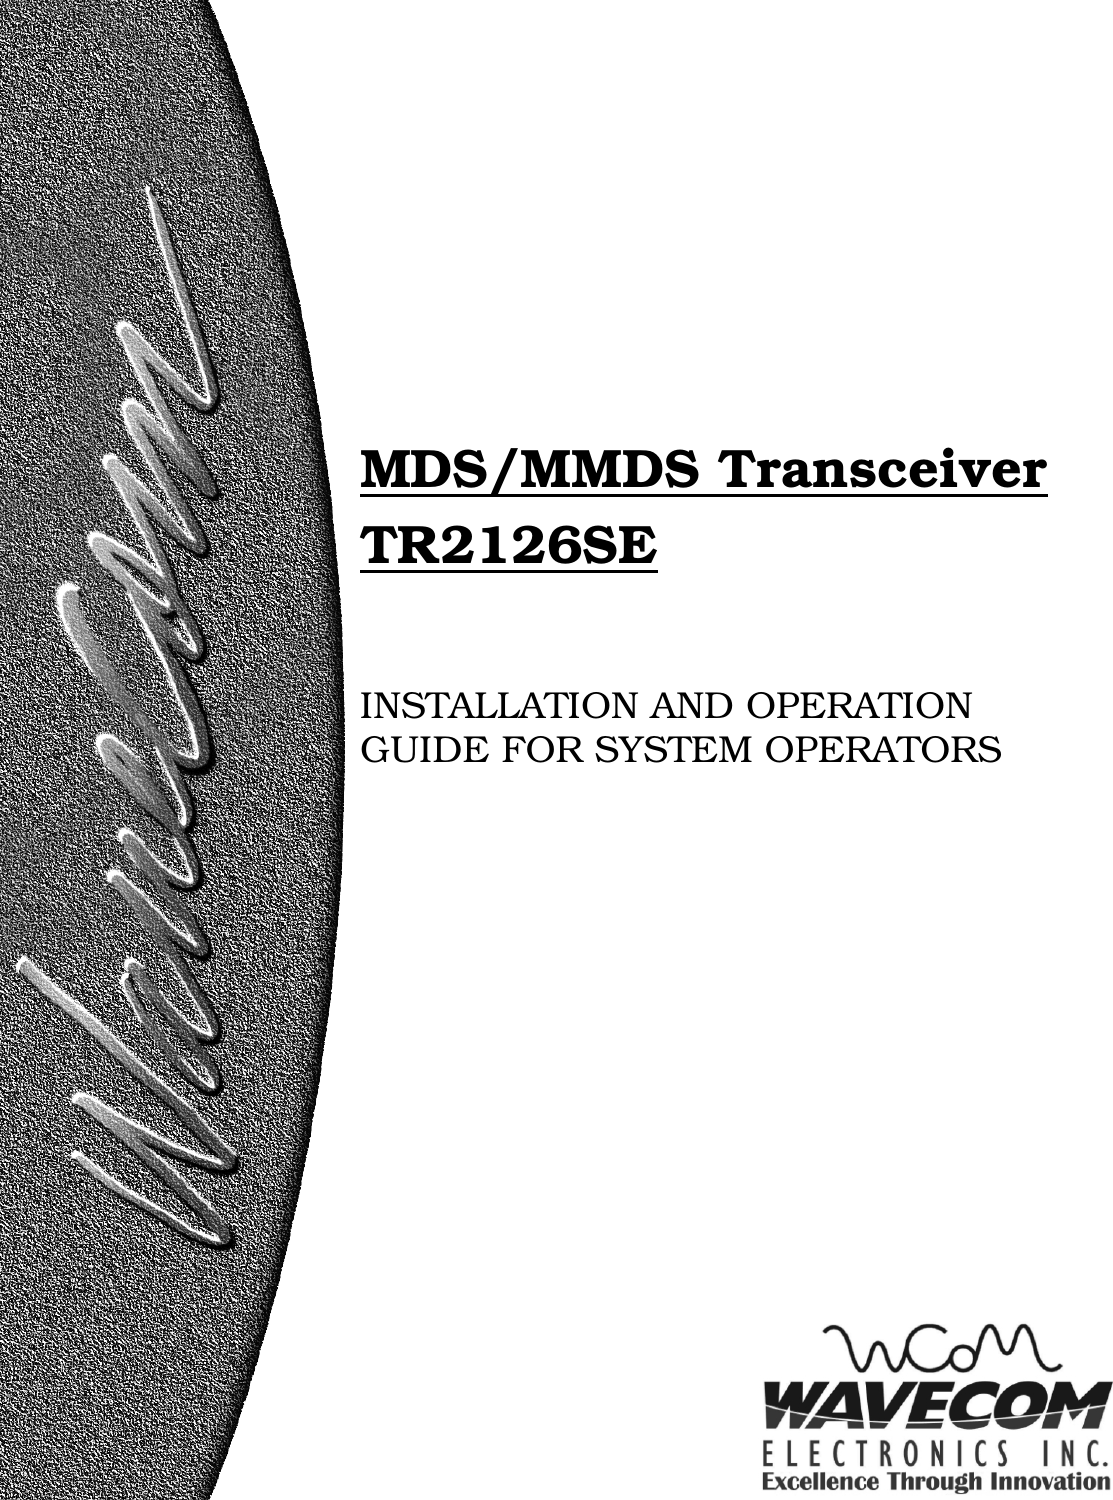   MDS/MMDS TransceiverTR2126SE   INSTALLATION AND OPERATION GUIDE FOR SYSTEM OPERATORS 